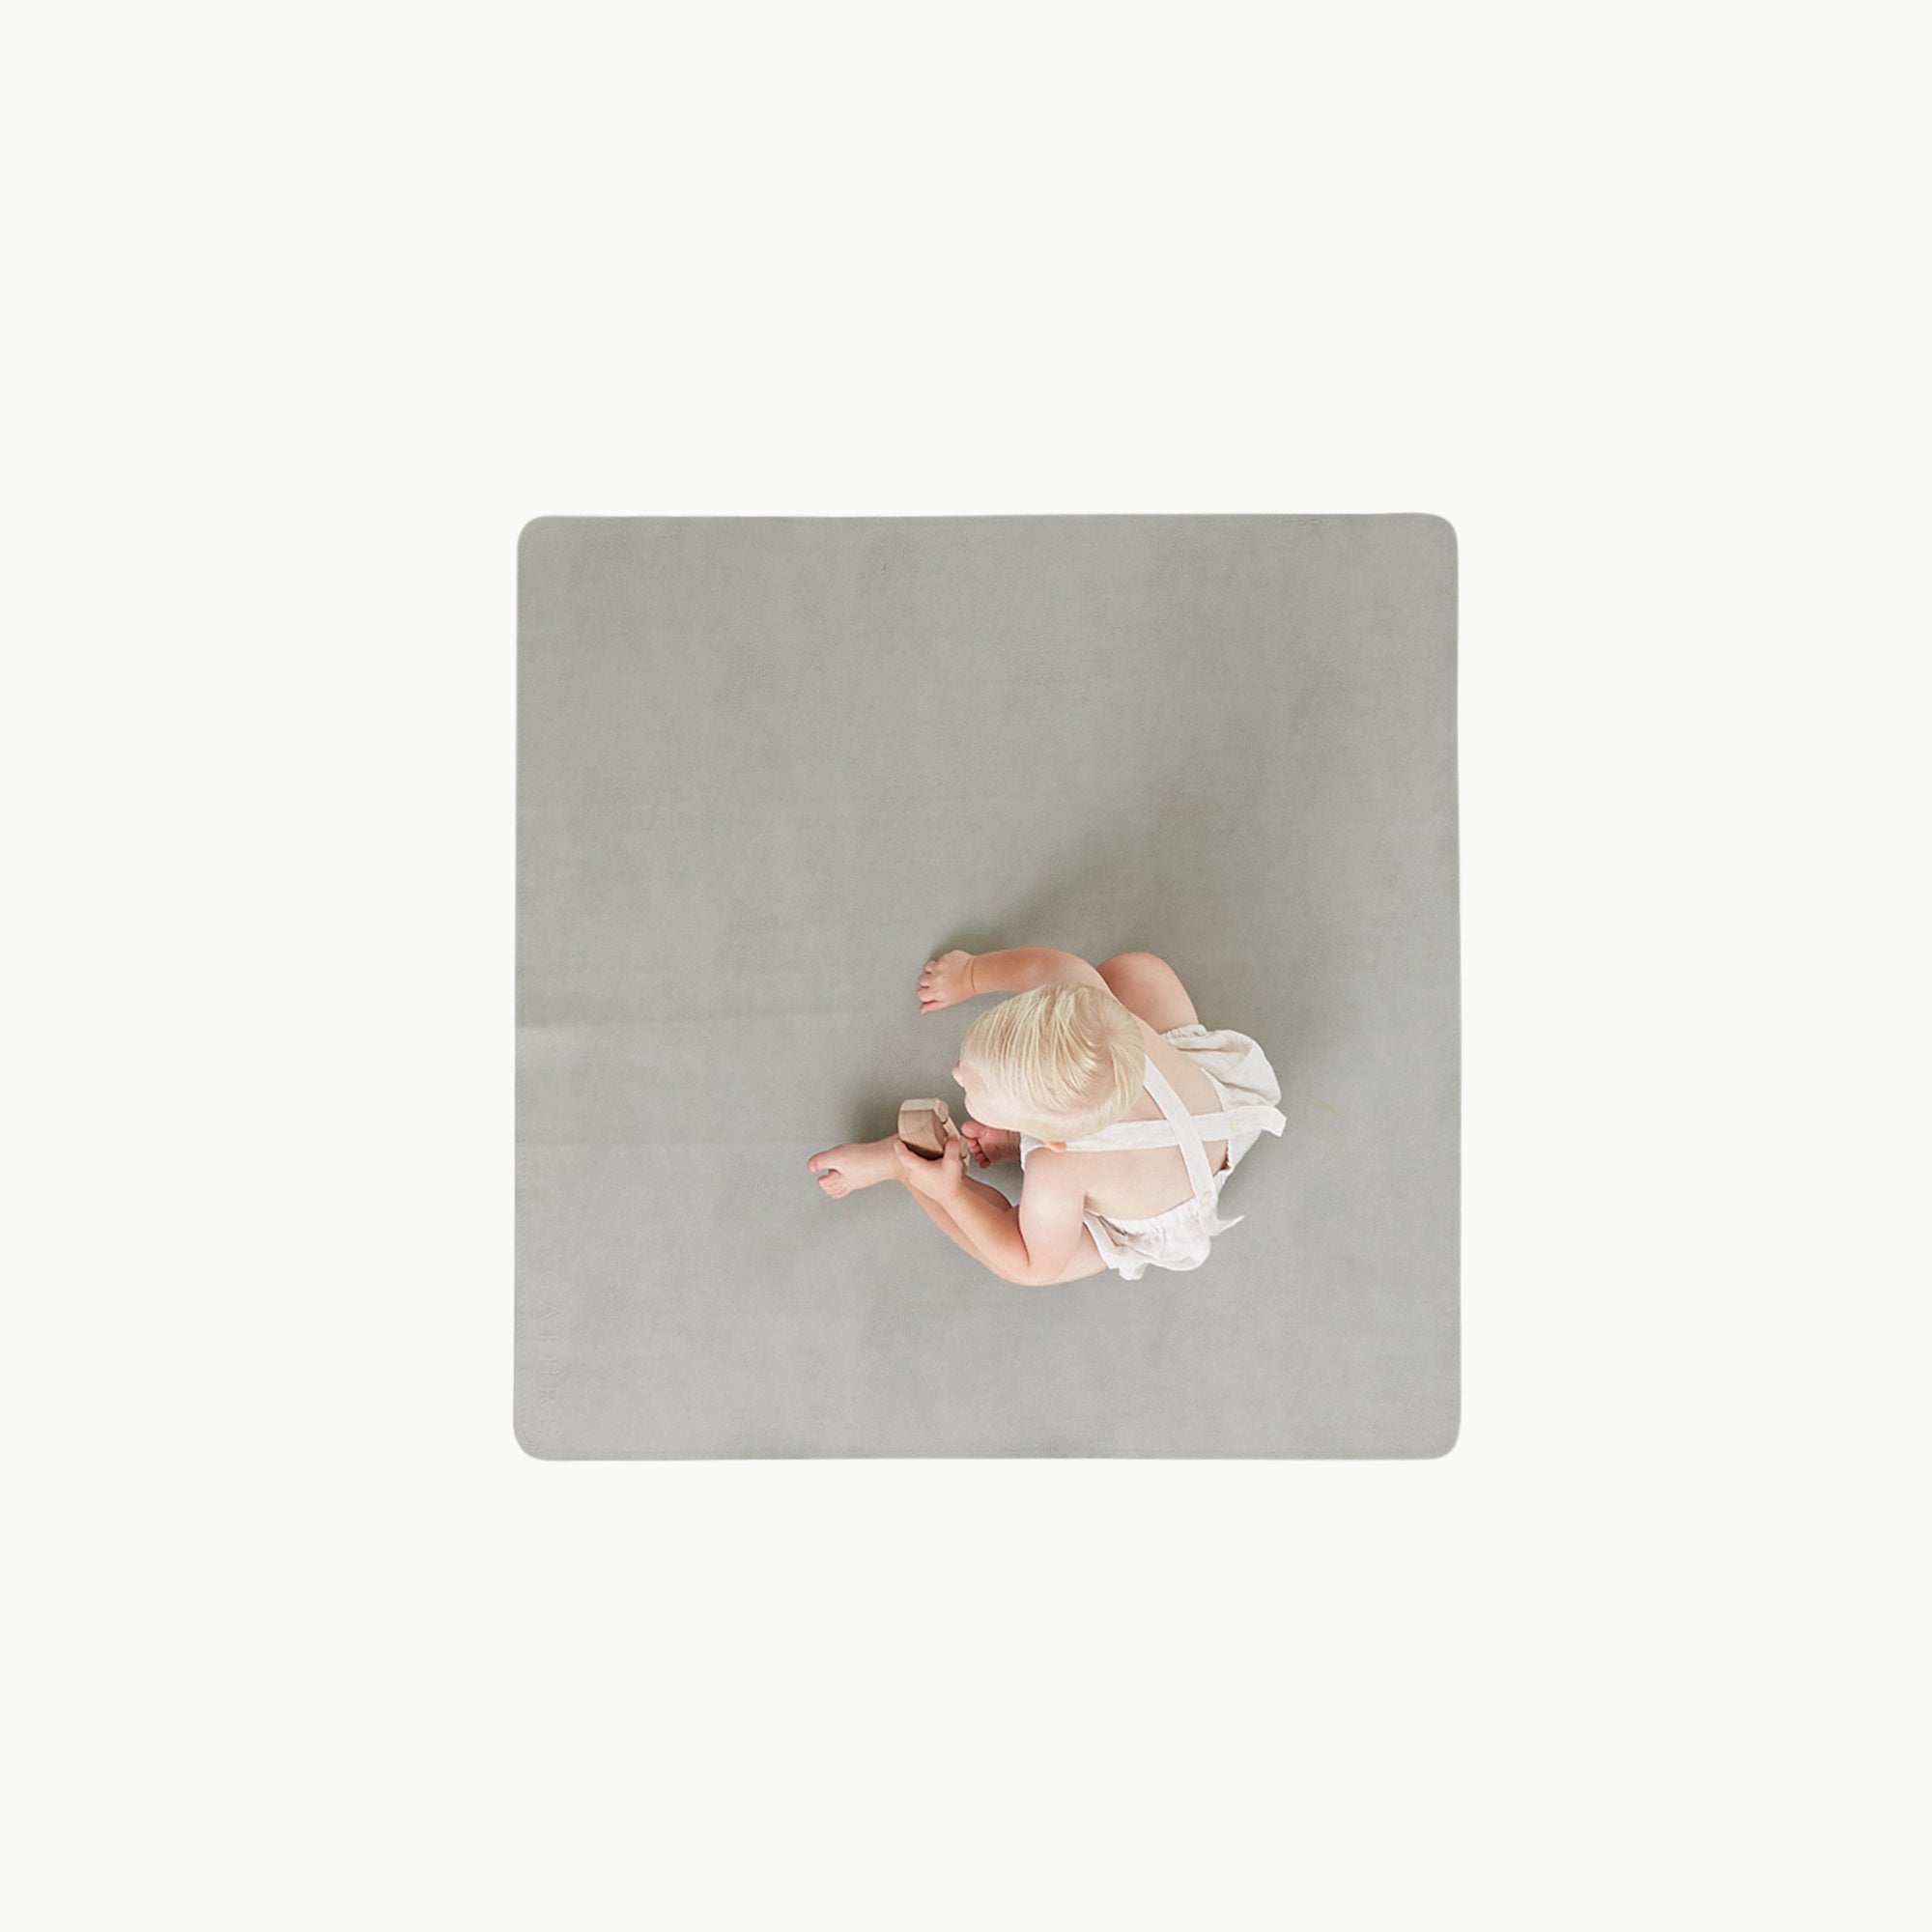 Pewter (on sale) / Square@overhead of kid sitting on the pewter midi square mat